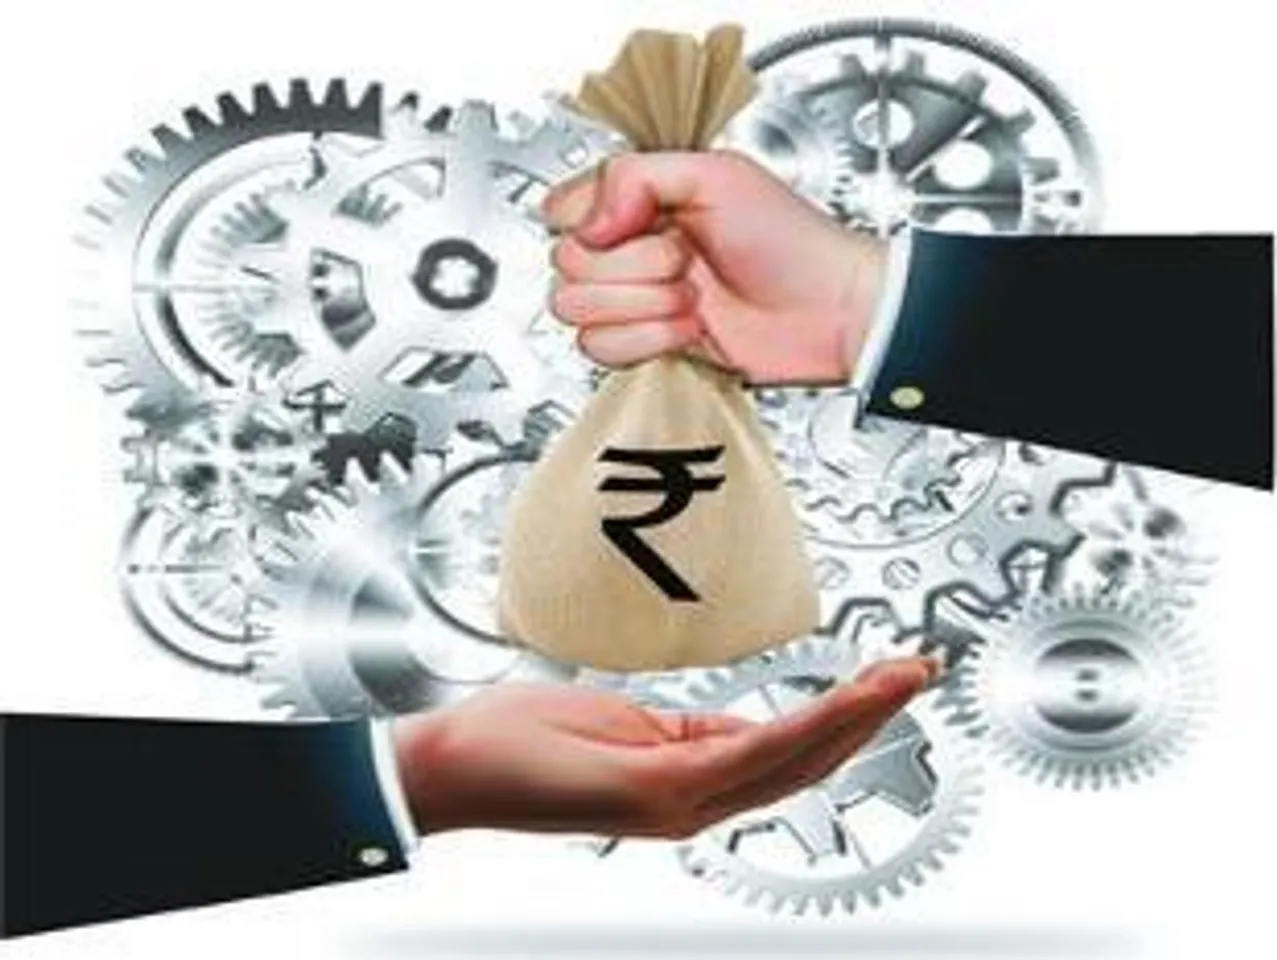 Fund of Funds Scheme for Startups Commits Rs. 7980 Cr to 99 Alternative Investment Funds